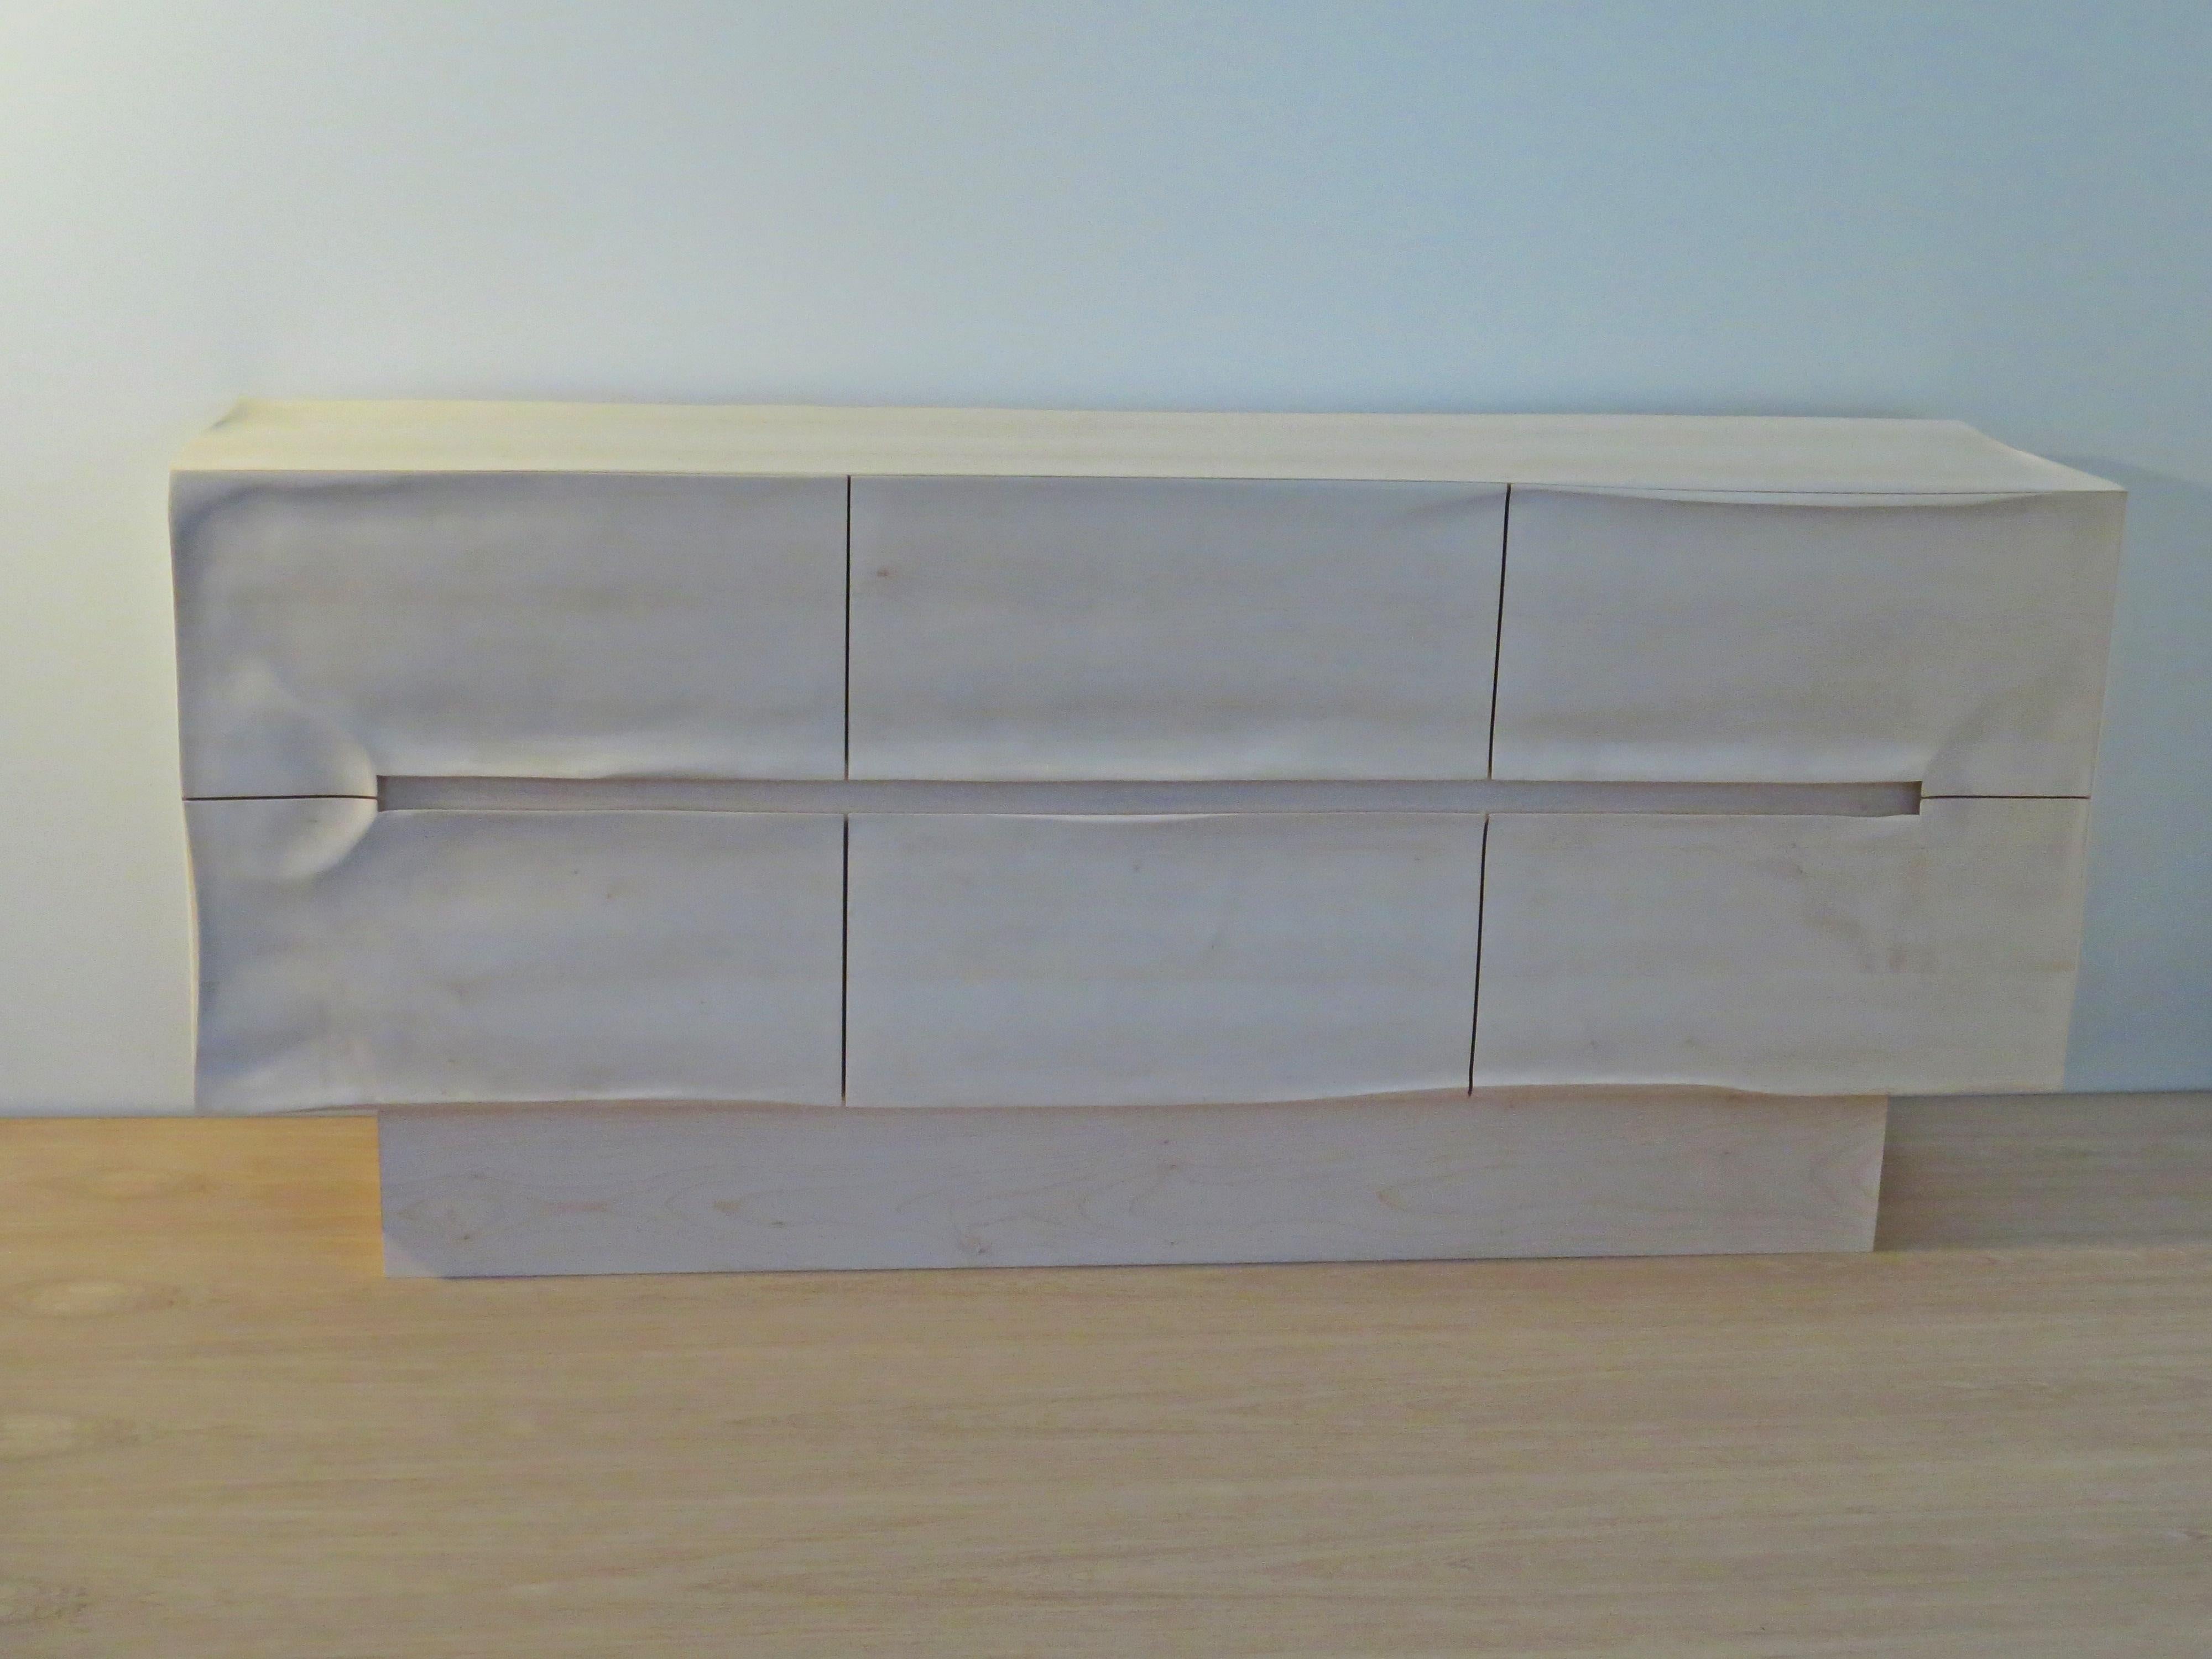 Hand-Crafted Sideboard Solid Wood, Organic Modern Design, Handcrafted in Germany, Sculptural For Sale